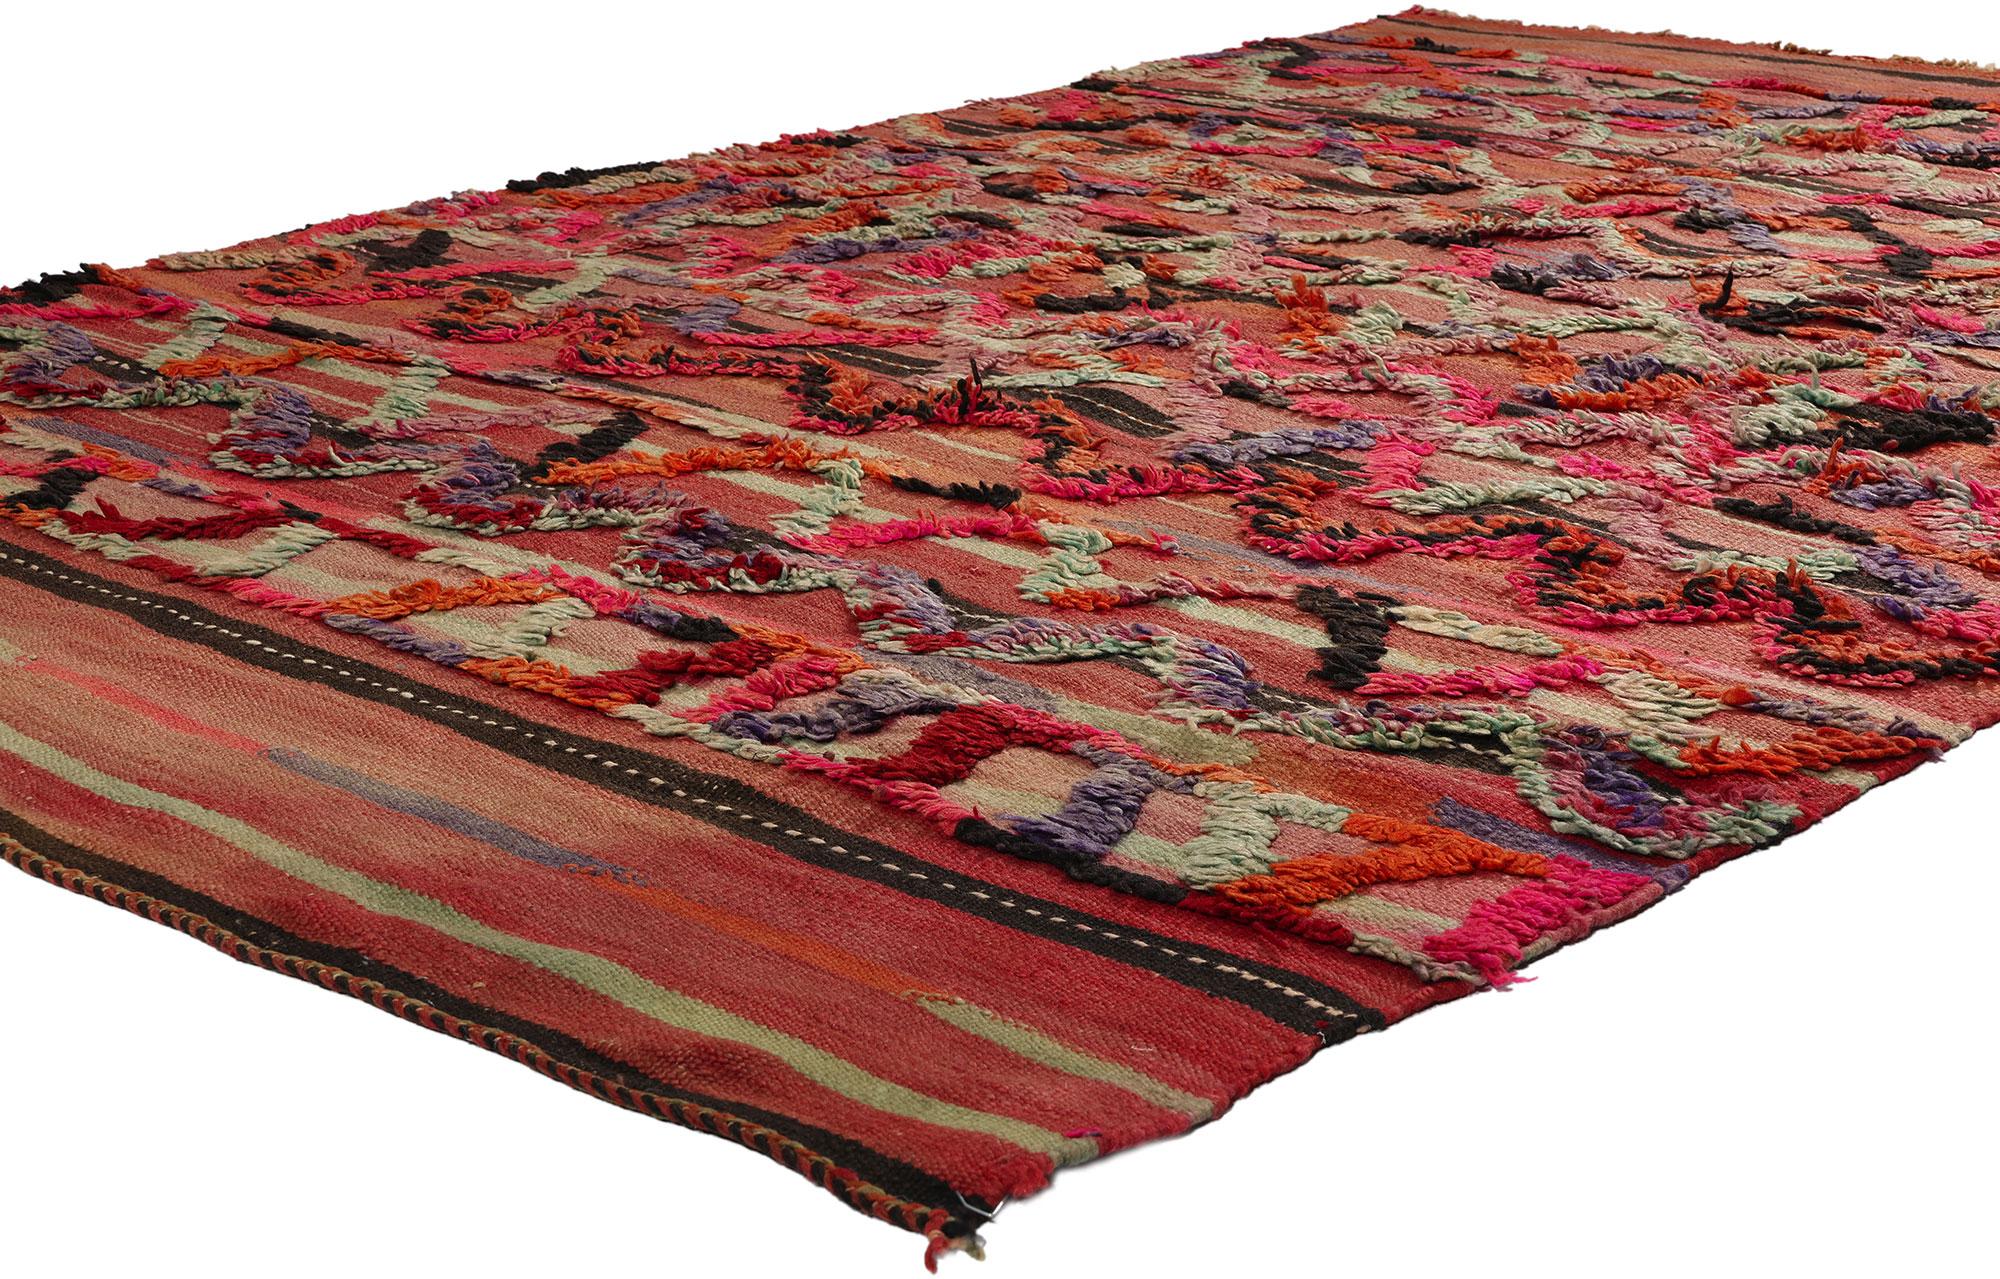 21832 Vintage High-Low Taznakht Moroccan Rug, 05'00 x 07'06. Taznakht rugs are a distinct style of handwoven rug originating from the Taznakht region nestled in the High Atlas Mountains of Morocco. Renowned for their vibrant hues, elaborate